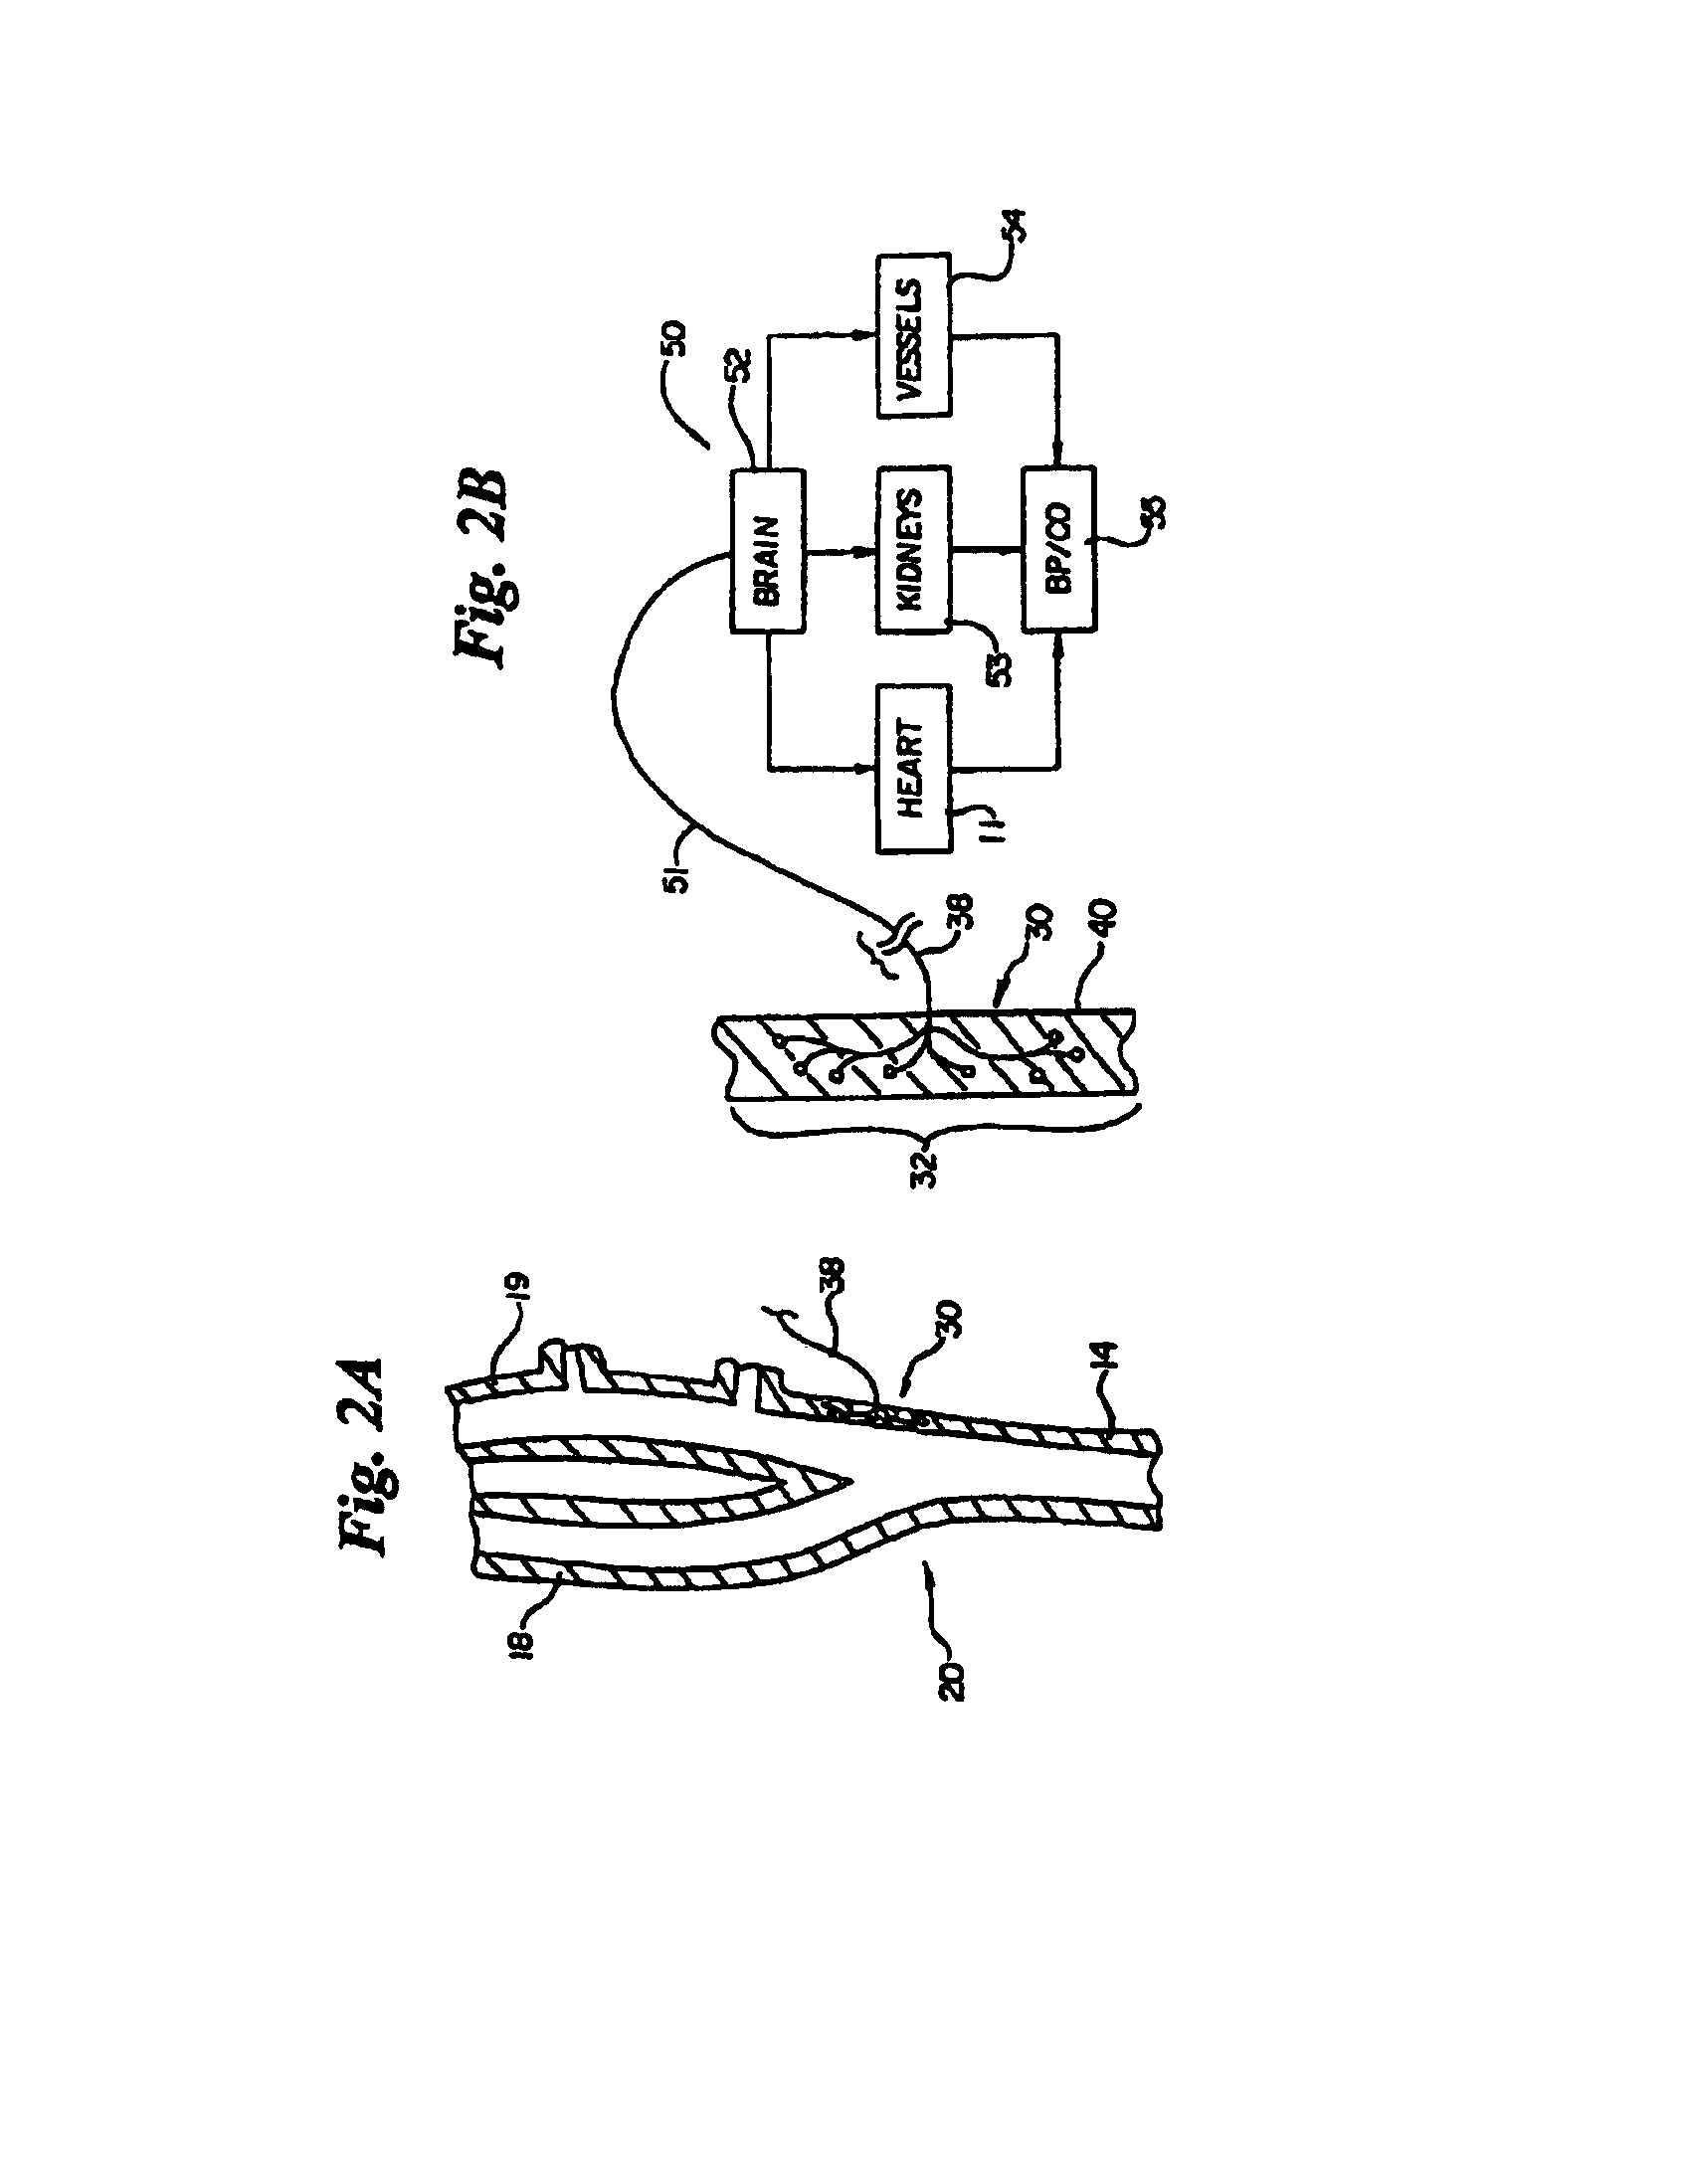 Electrode designs and methods of use for cardiovascular reflex control devices